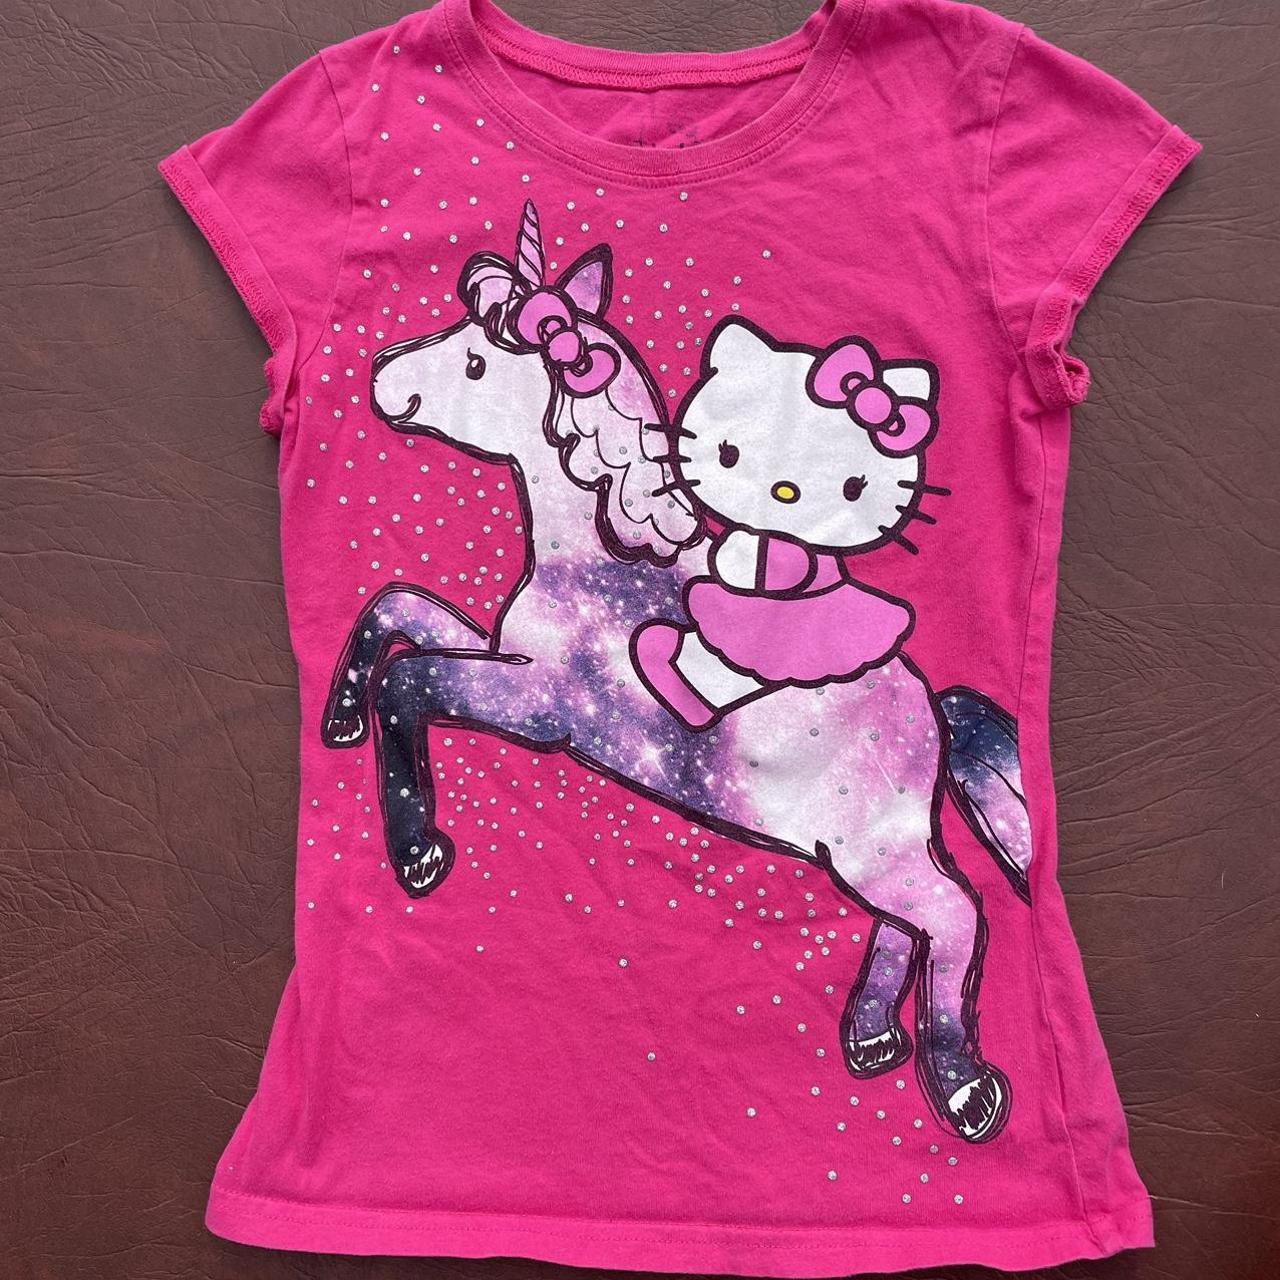 Hello Kitty Y2K Pink Baby Tee Size XS - $13 (67% Off Retail) - From